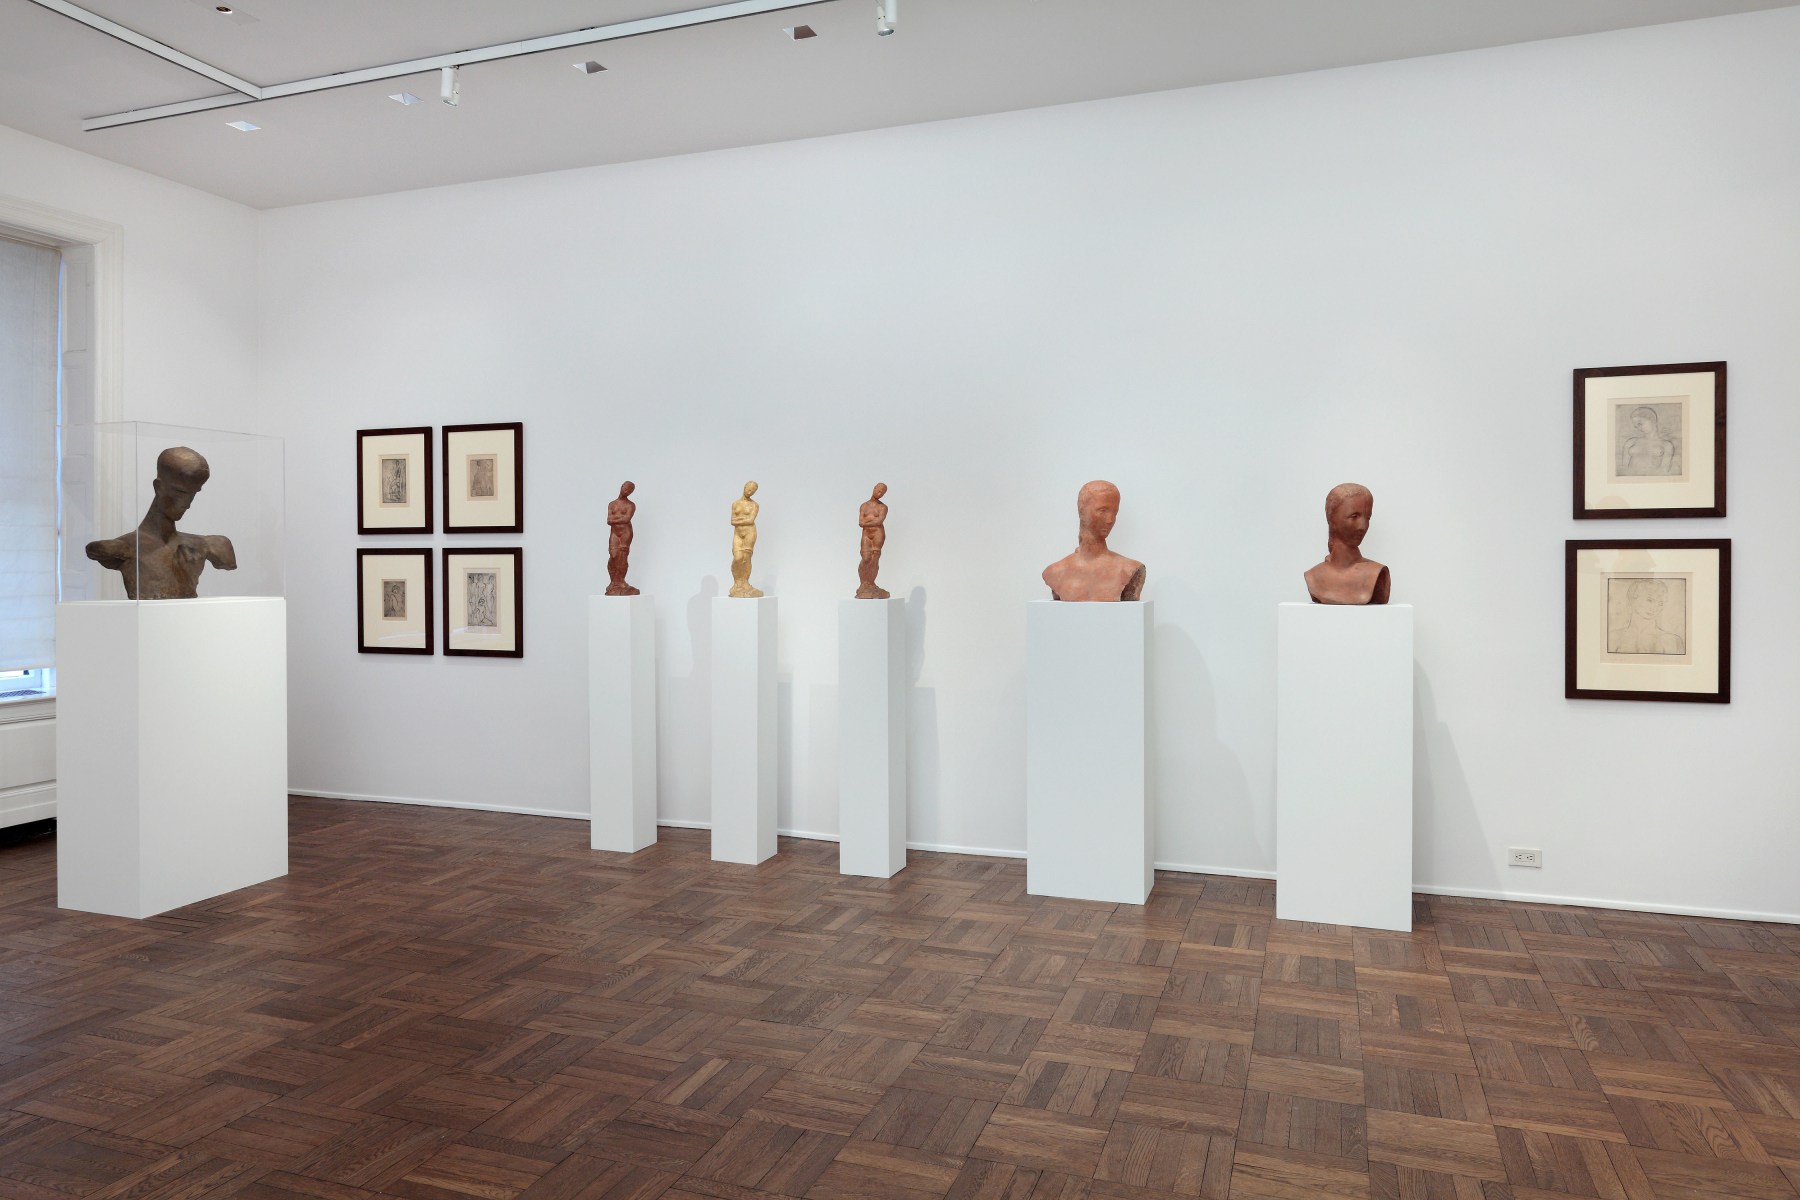 WILHELM LEHMBRUCK, Sculptures and Etchings, New York, 2012, Installation Image 8